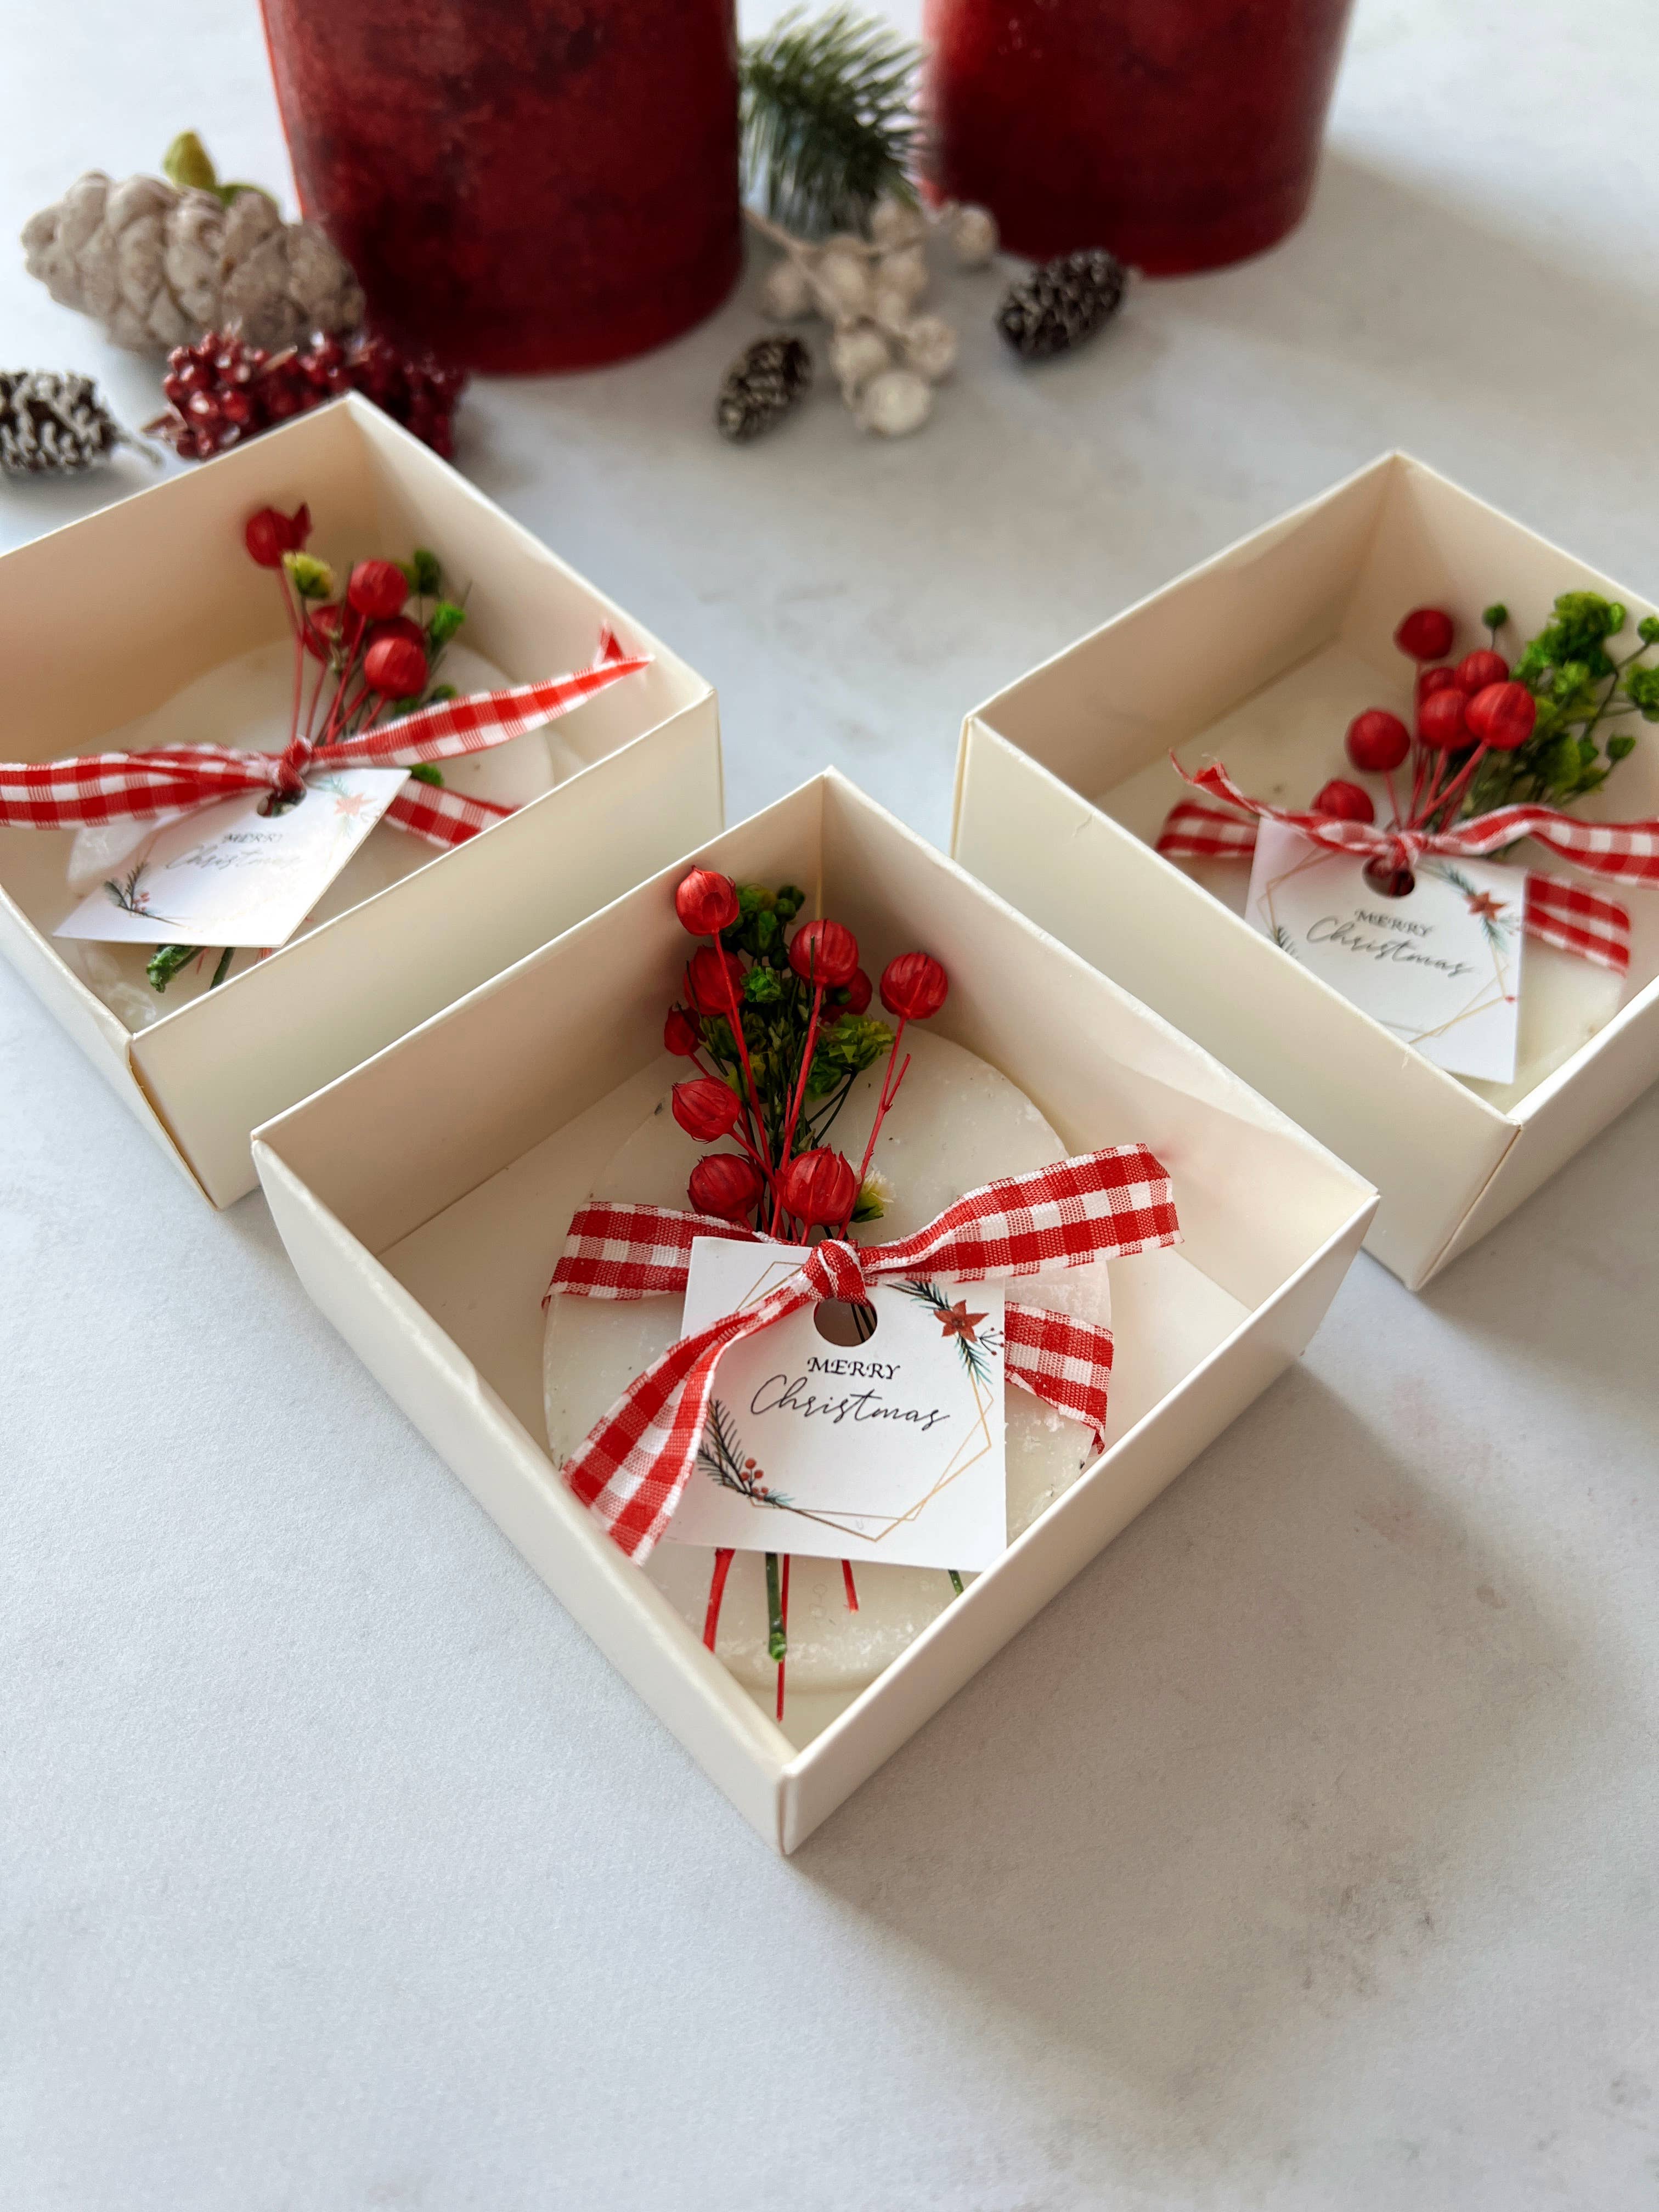 How to Create Holiday Gift Baskets for Clients - Magnets USA